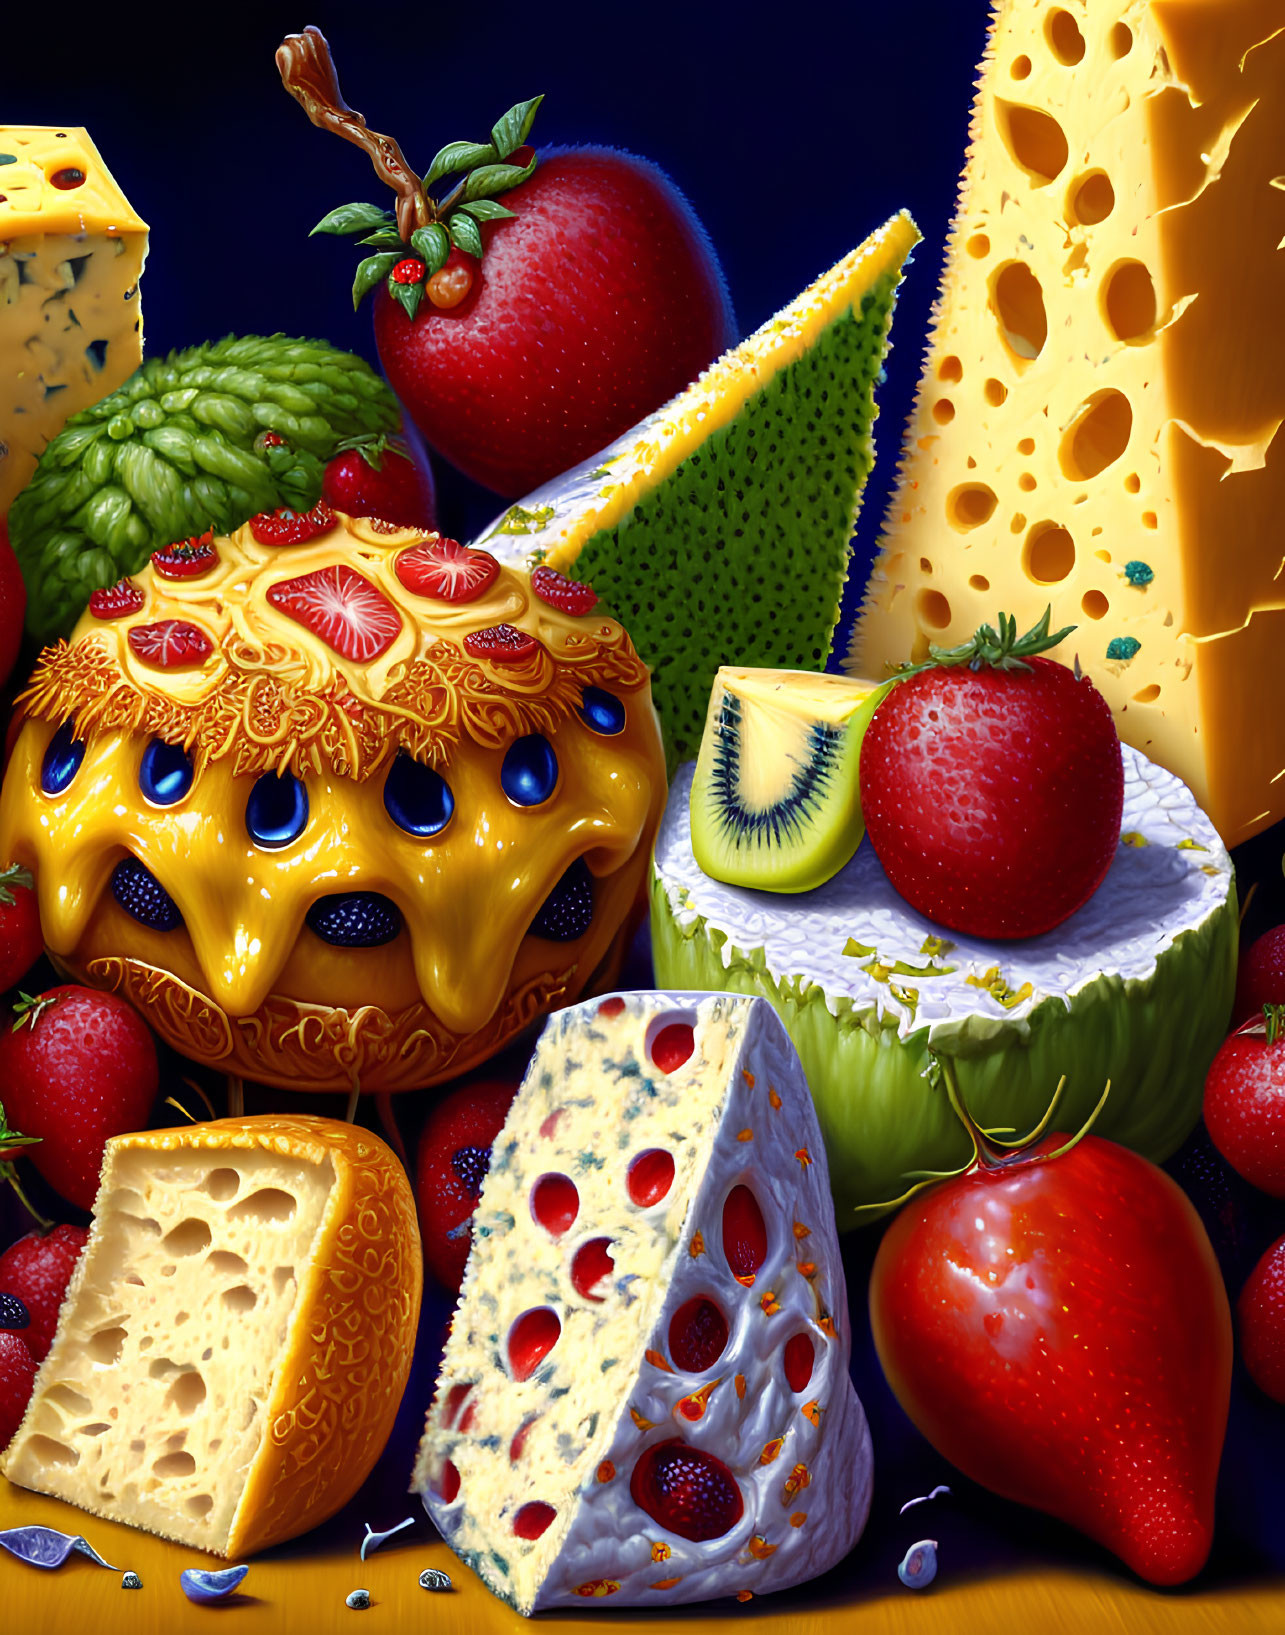 Colorful Cheese and Fruit Still-Life with Hyper-Realistic Details